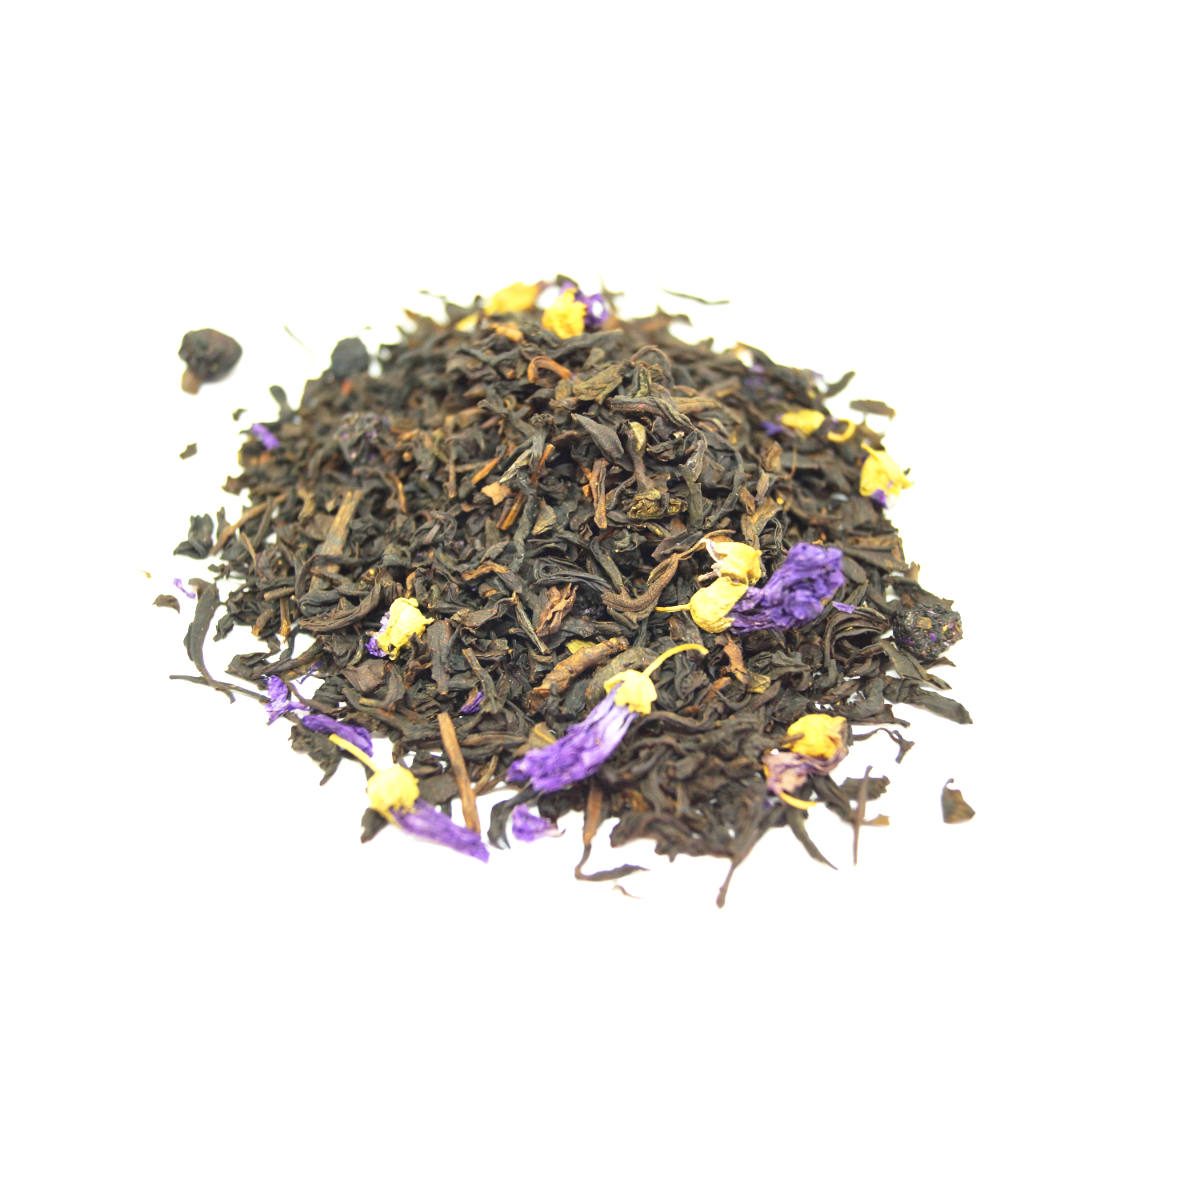 Muffin Mix Black Tea This combination of black teas paired with freeze dried bits of organic Blueberries and Cornflowers.